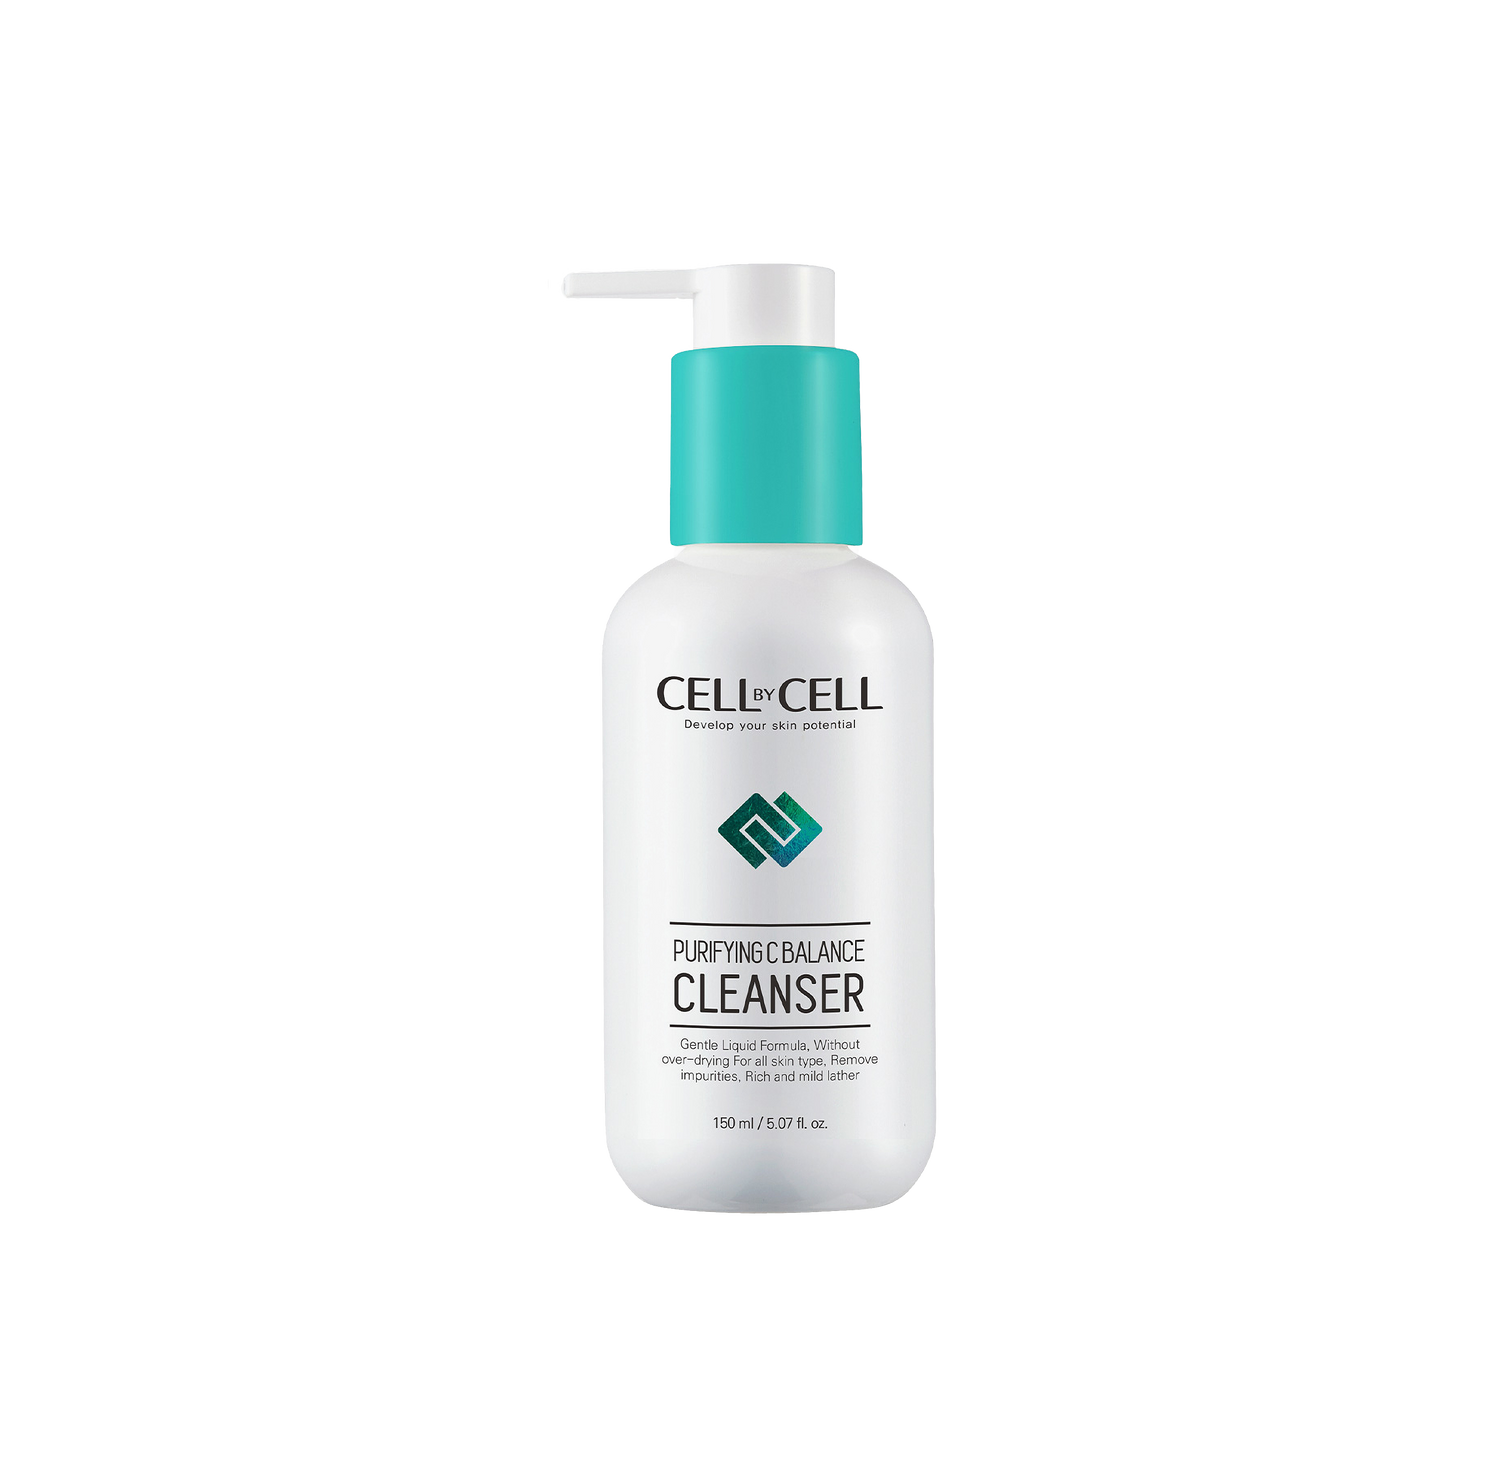 Purifying C Balance Cleanser